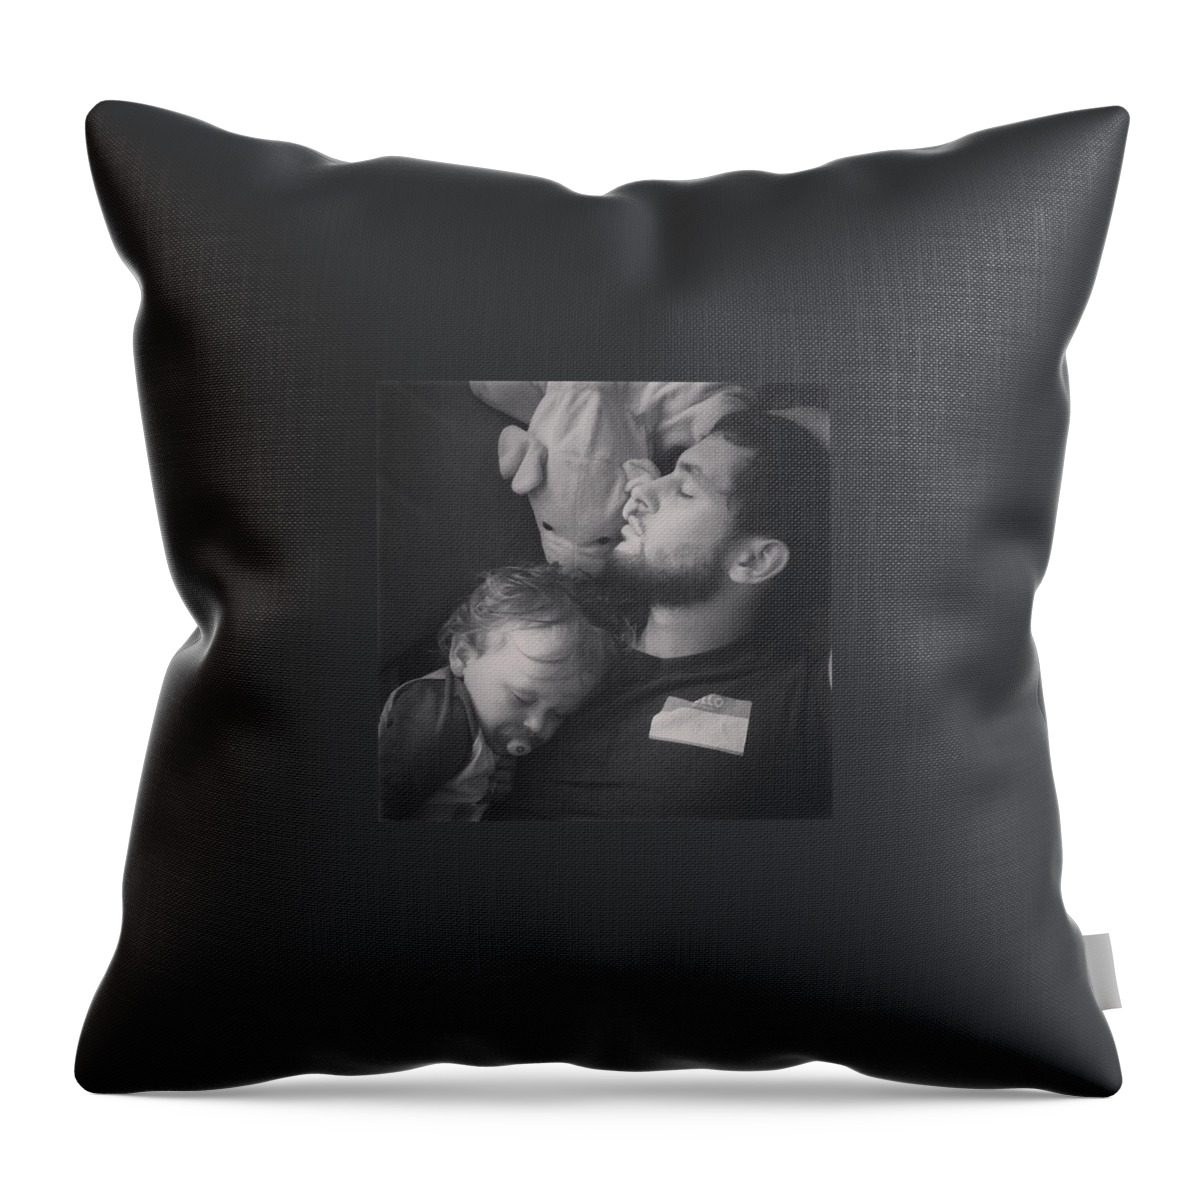 Nap Throw Pillow featuring the photograph Mad Nappers by Sara Godoy